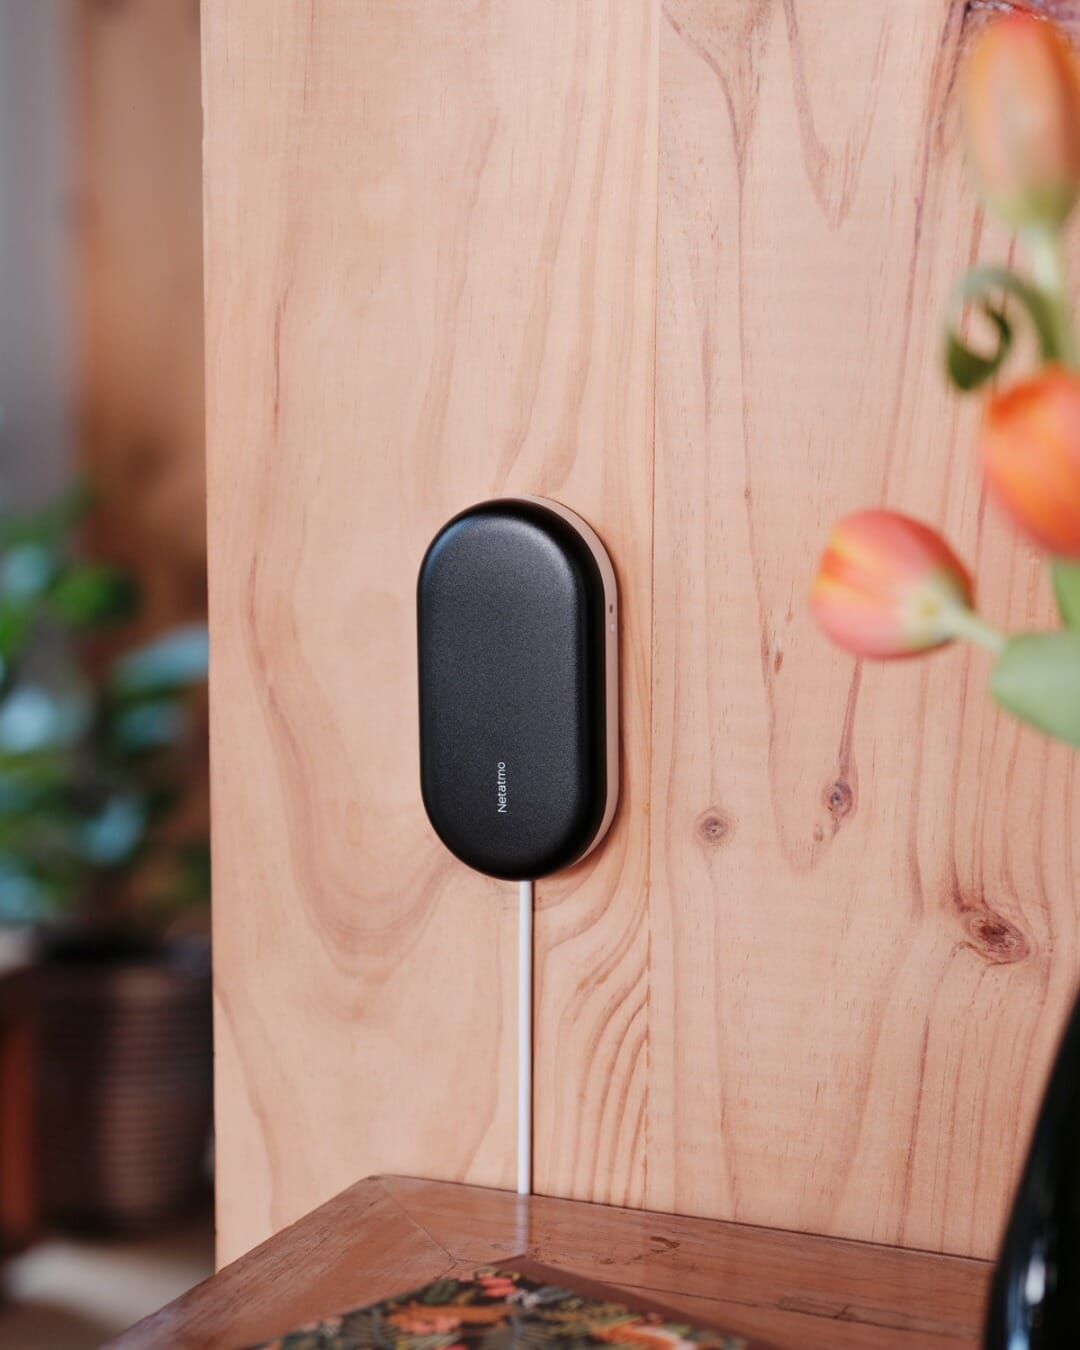 The Clever Netatmo Smart Air Conditioner Controller